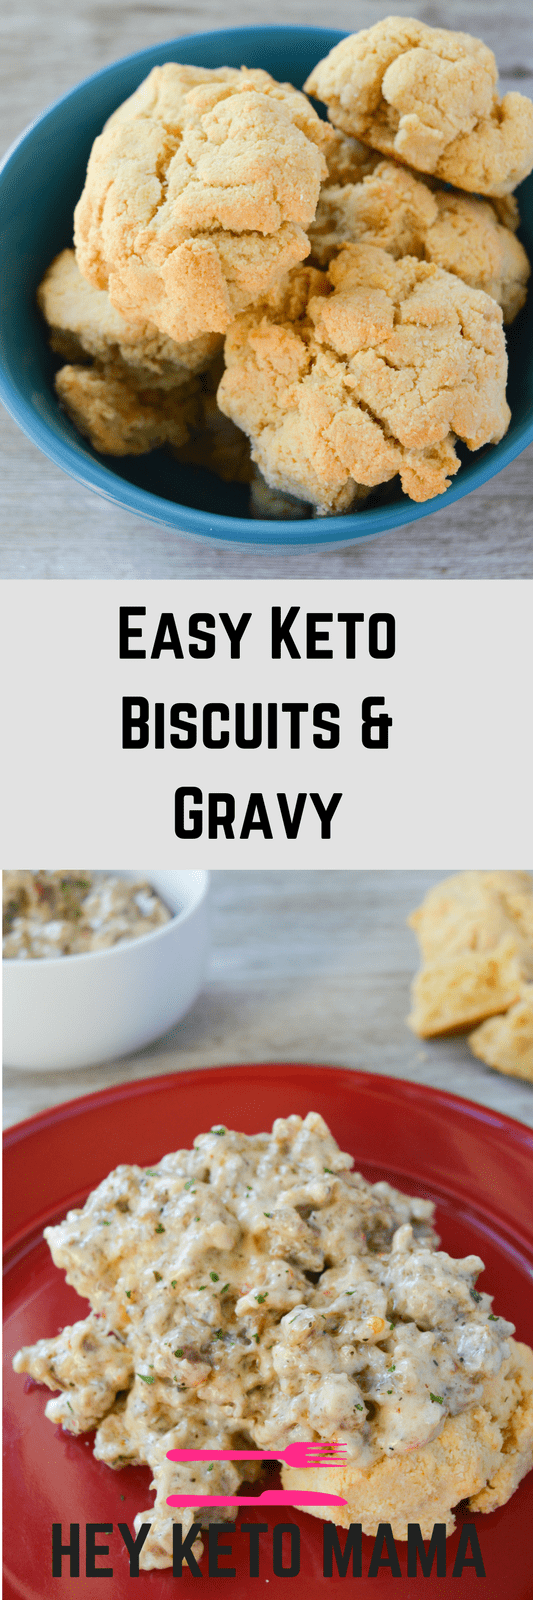 This Easy Keto Biscuits and Gravy recipe is an amazing low carb way to start your day with a southern feel! Keto breakfast can be tough, but this simple recipe will have you going back for seconds!